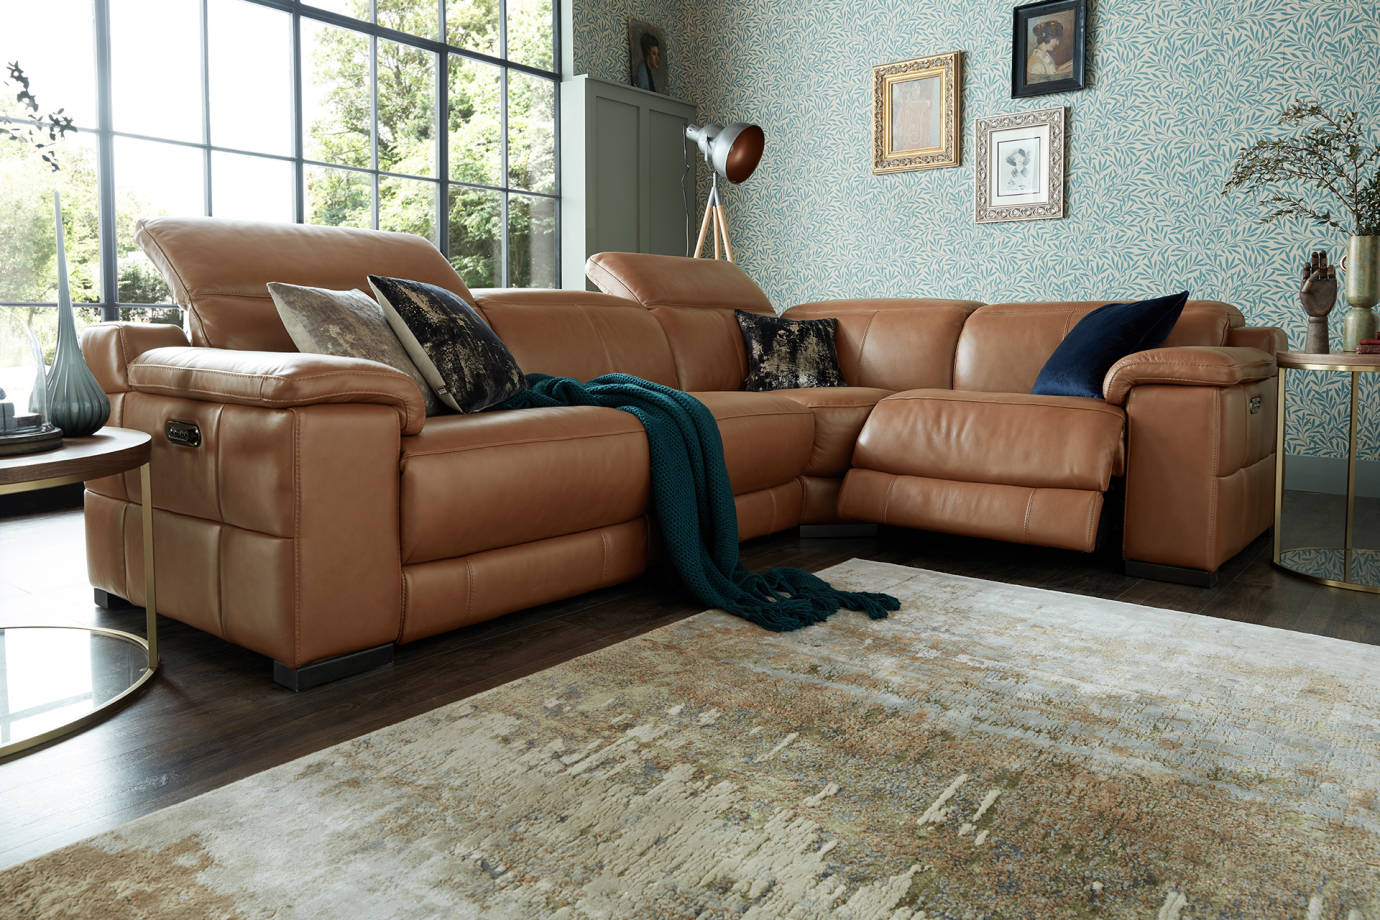 Recliner Sofas Leather Fabric And, Leather Sofa Recliner Furniture